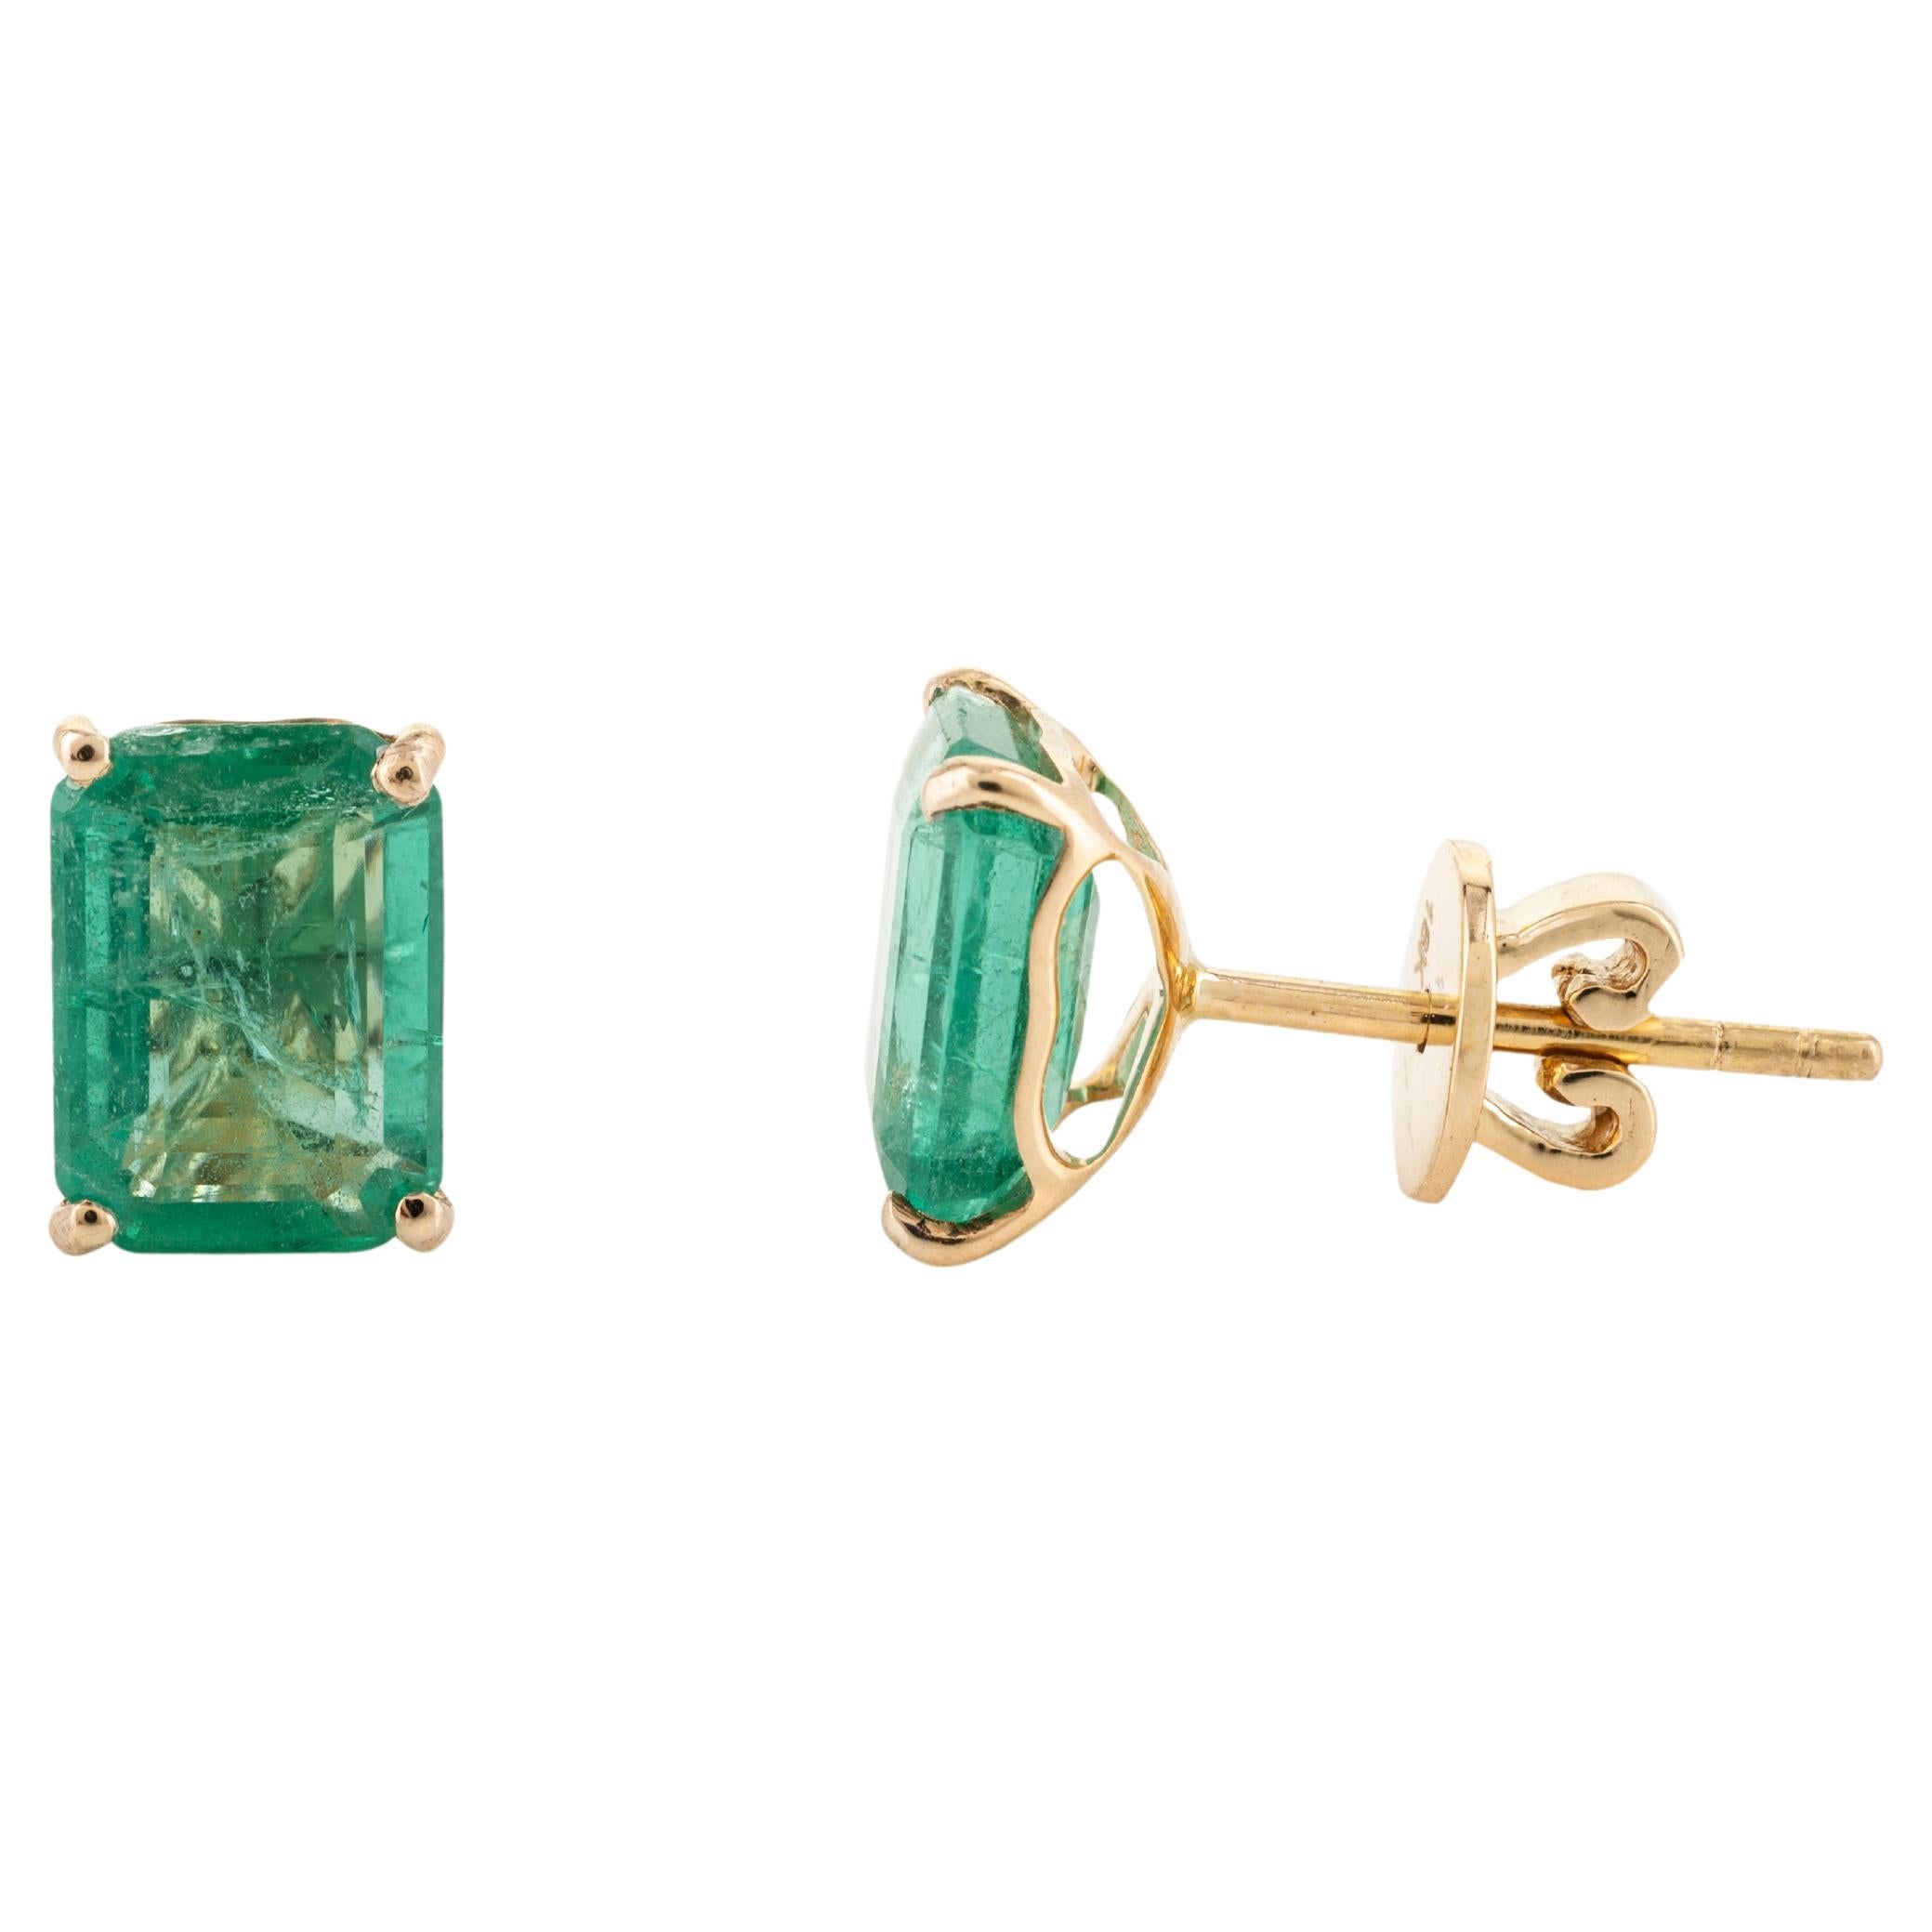 Natural Solitaire Emerald 18k Solid Yellow Gold Stud Earrings Gift for Her For Sale